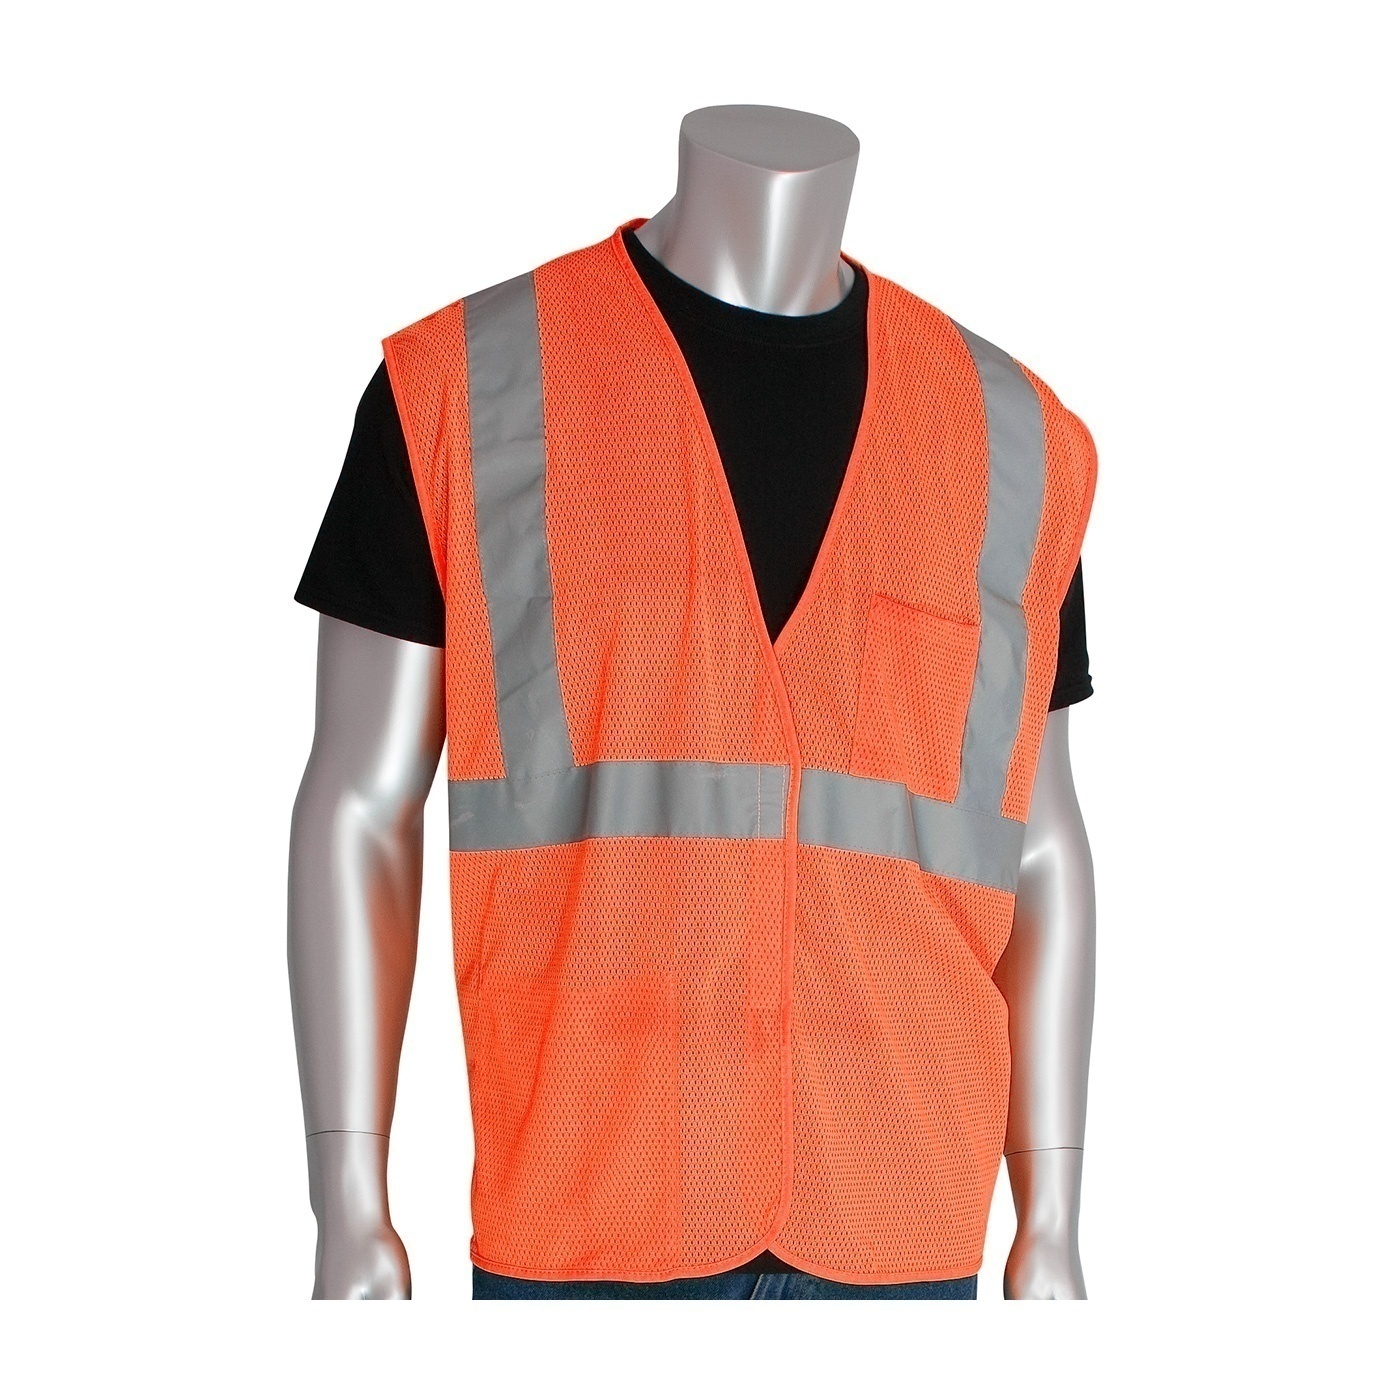 PIP ANSI Type R Class 2 Two Pocket Value Orange Mesh Vest from Columbia Safety